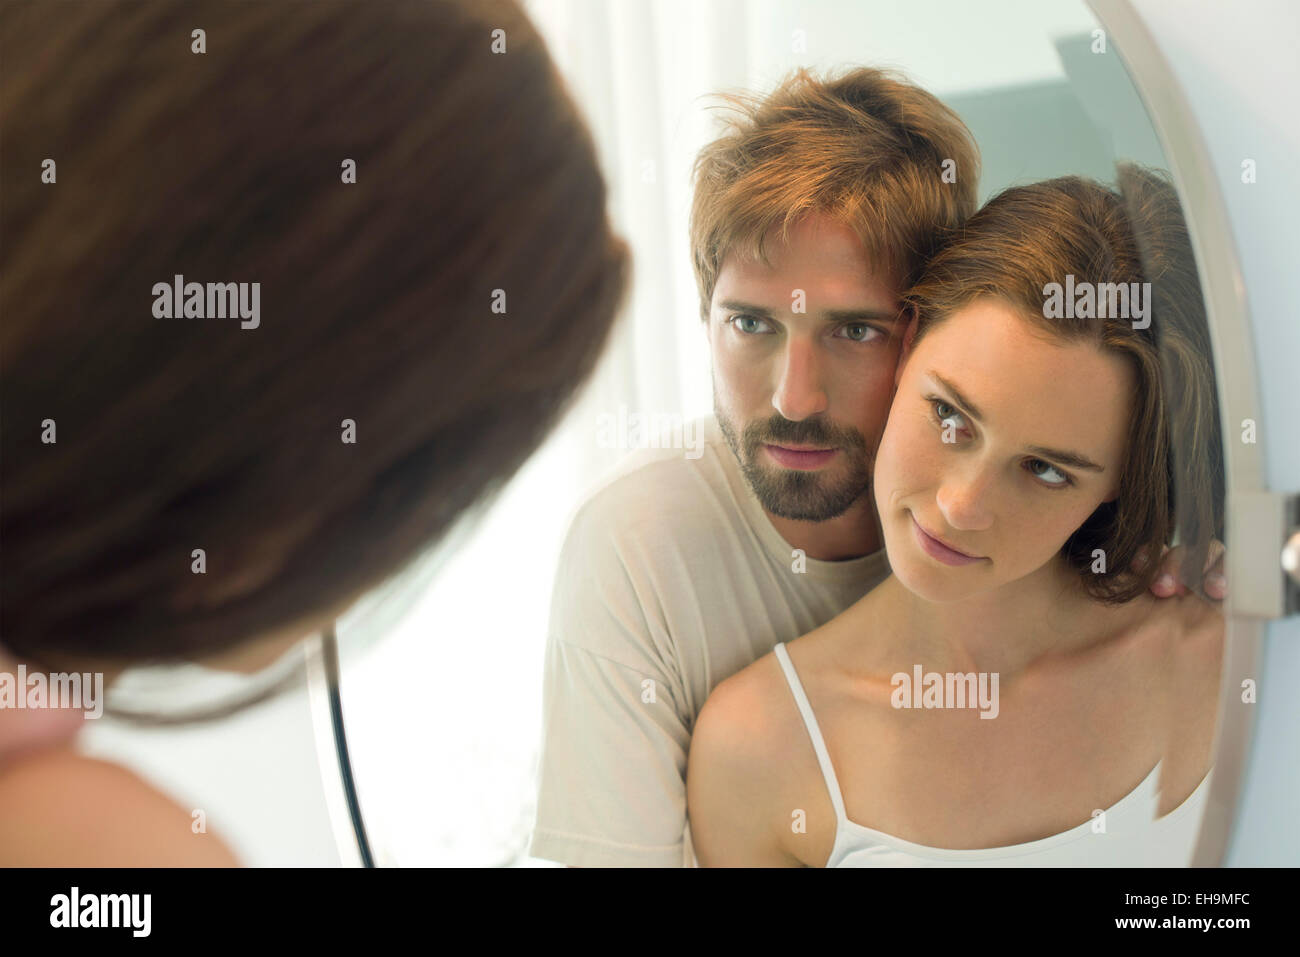 Couple cheek to cheek, looking at each other in mirror Stock Photo